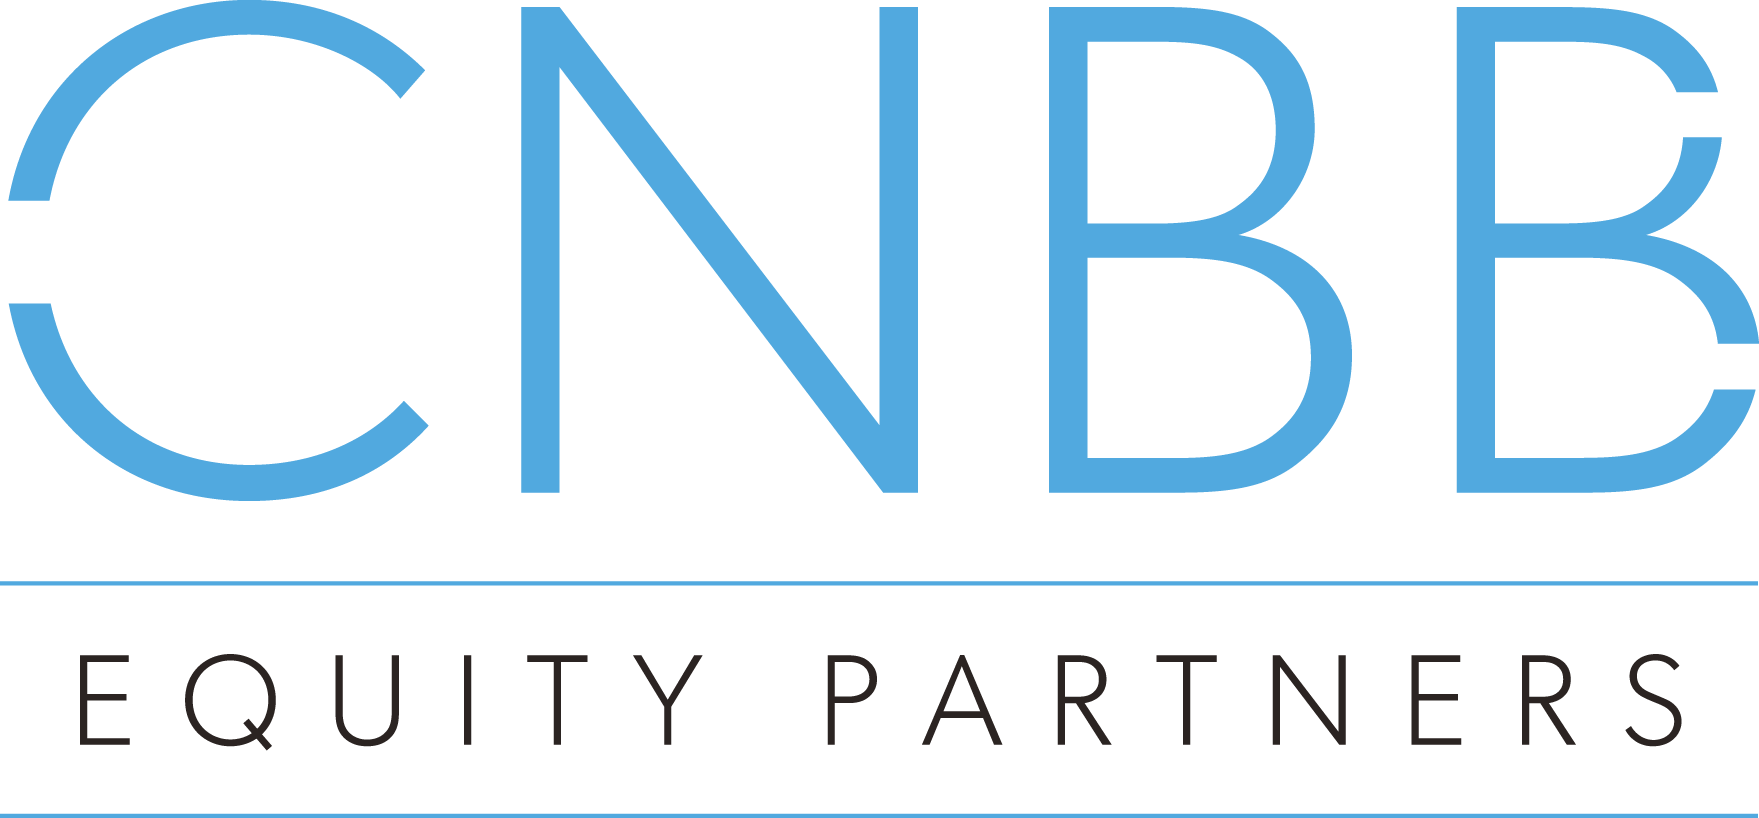 CNBB Equity Partners